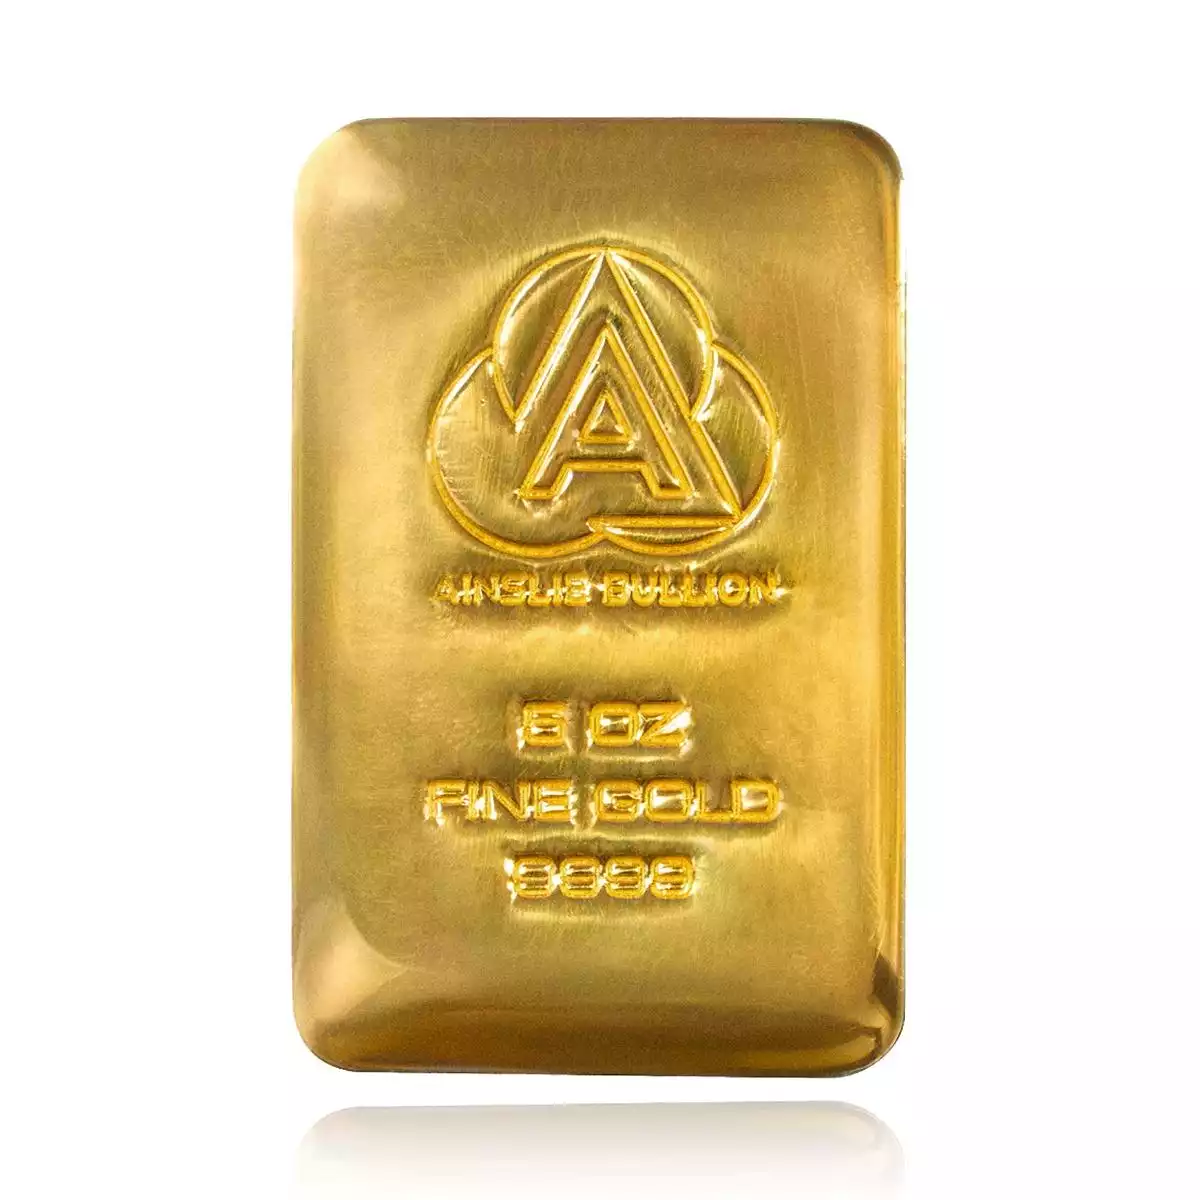 5 oz ainslie gold bullion. this 5oz ainslie gold bar is a cast bar with each bar having a slightly unique surface pattern. each gold bar is struck wit...